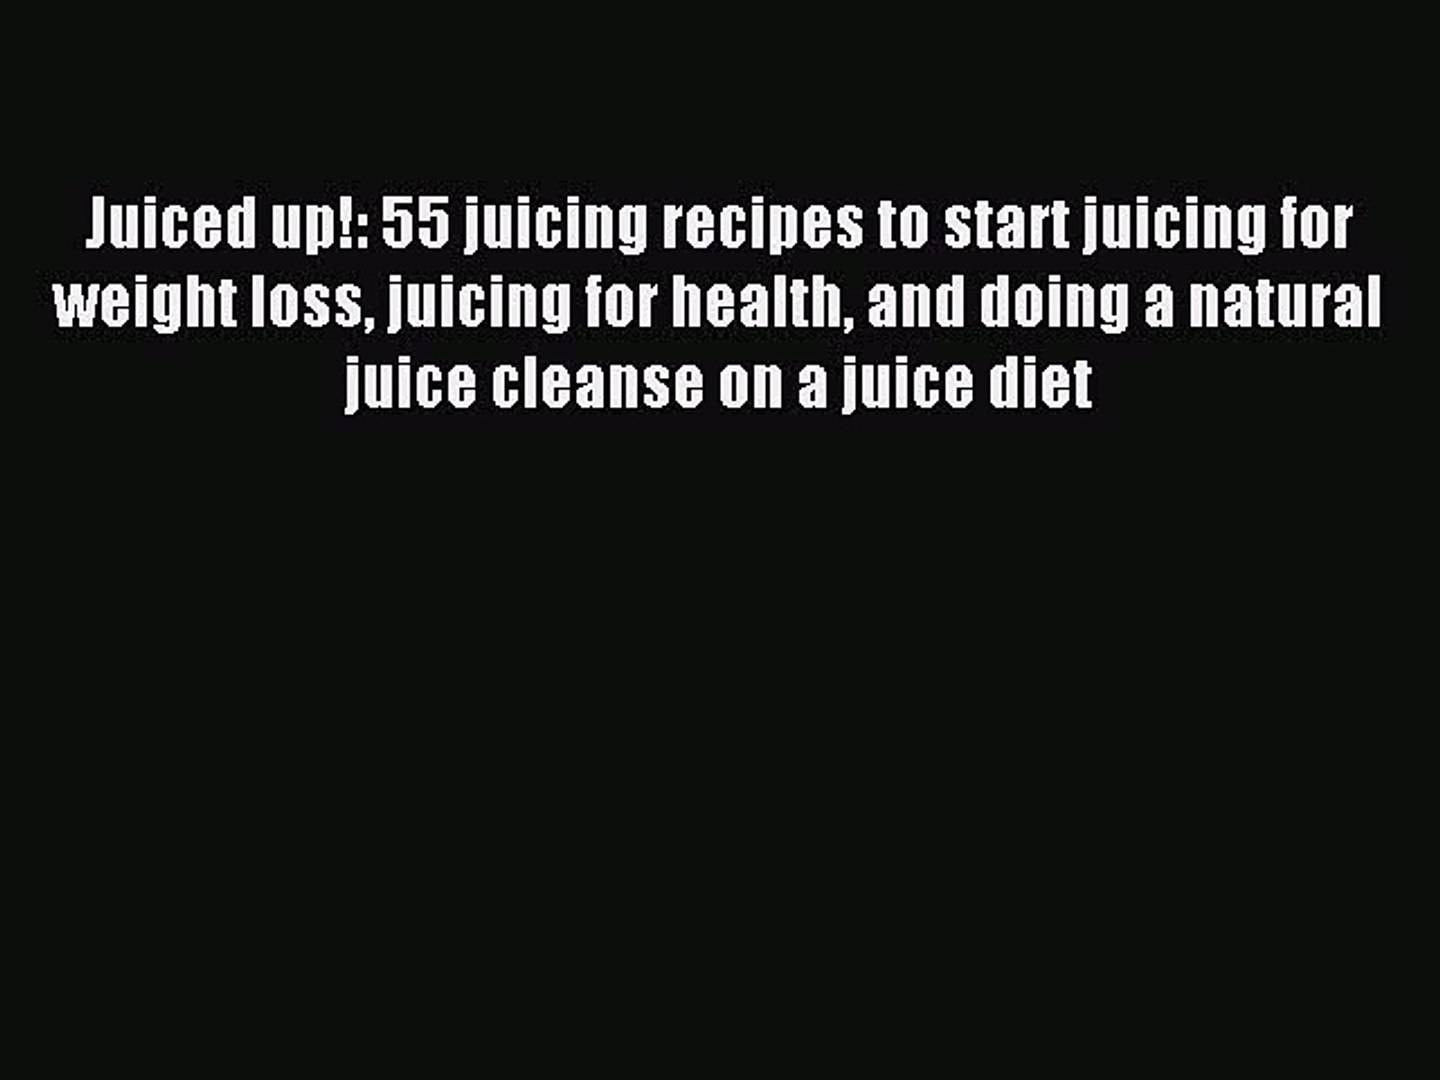 ⁣Read Juiced up!: 55 juicing recipes to start juicing for weight loss juicing for health and